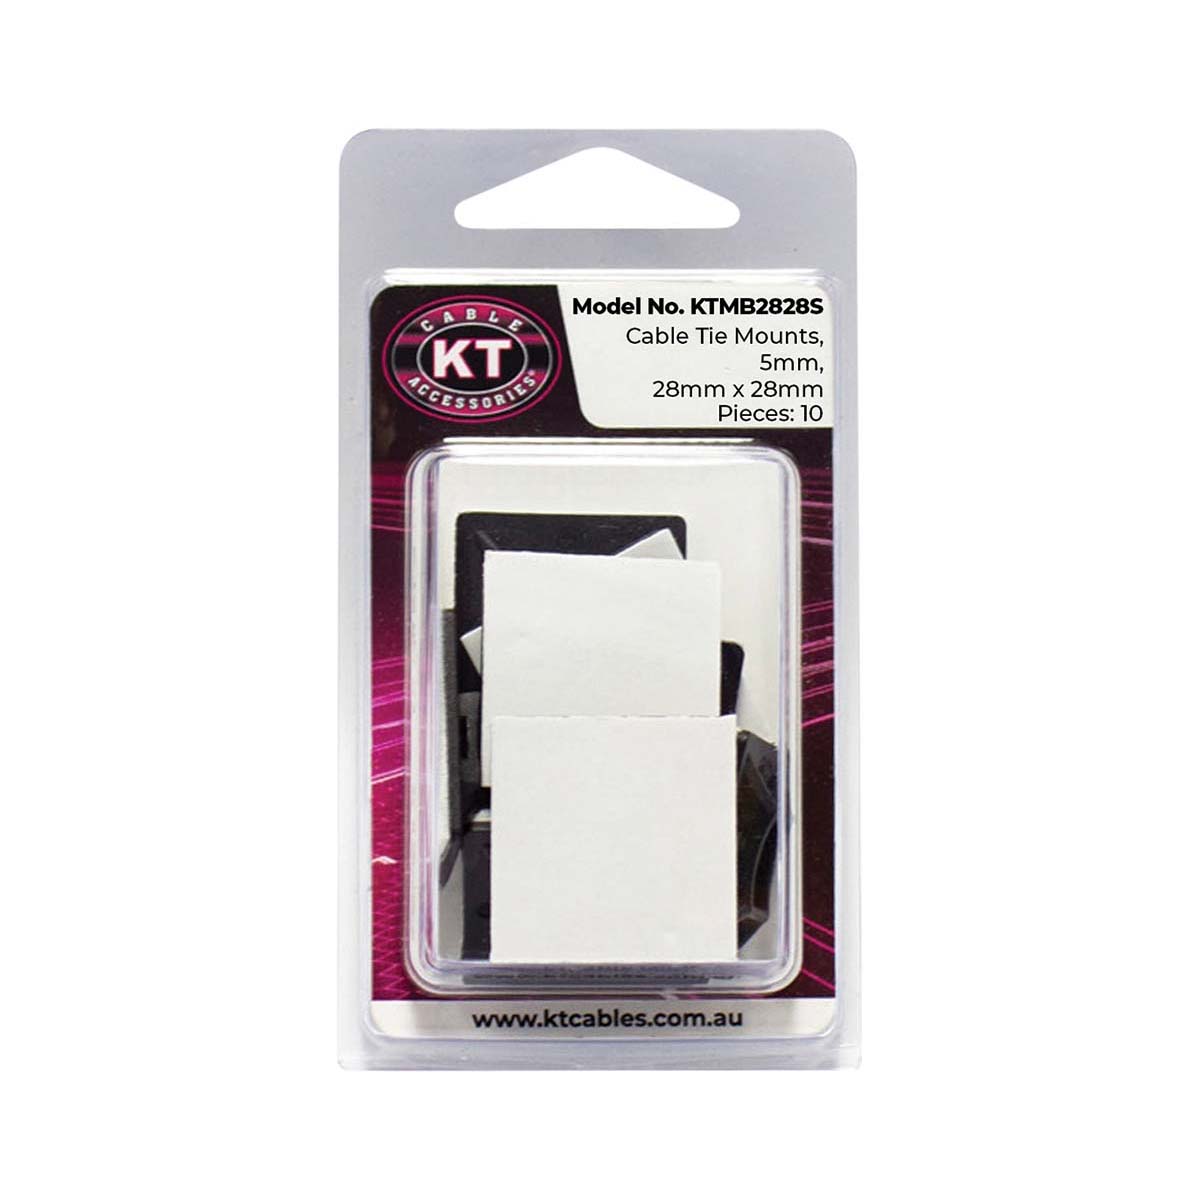 KT Cables Cable Tie Mounts 28mm